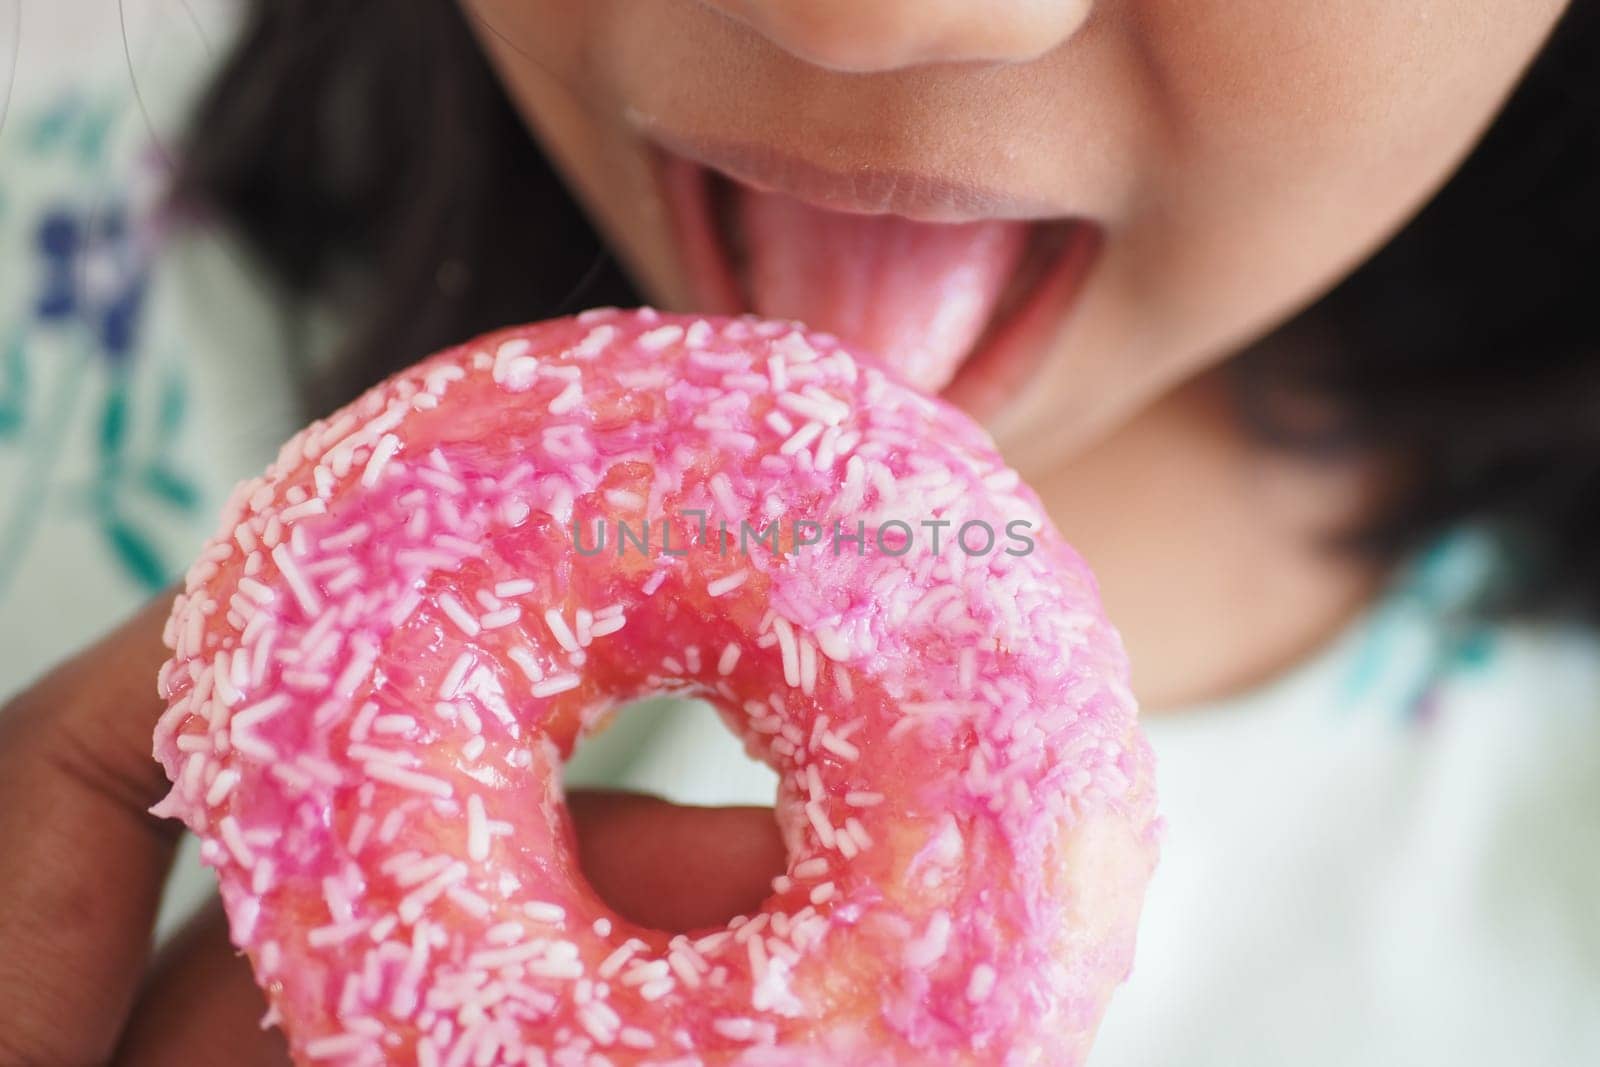 child mouth eating chocolate donuts .